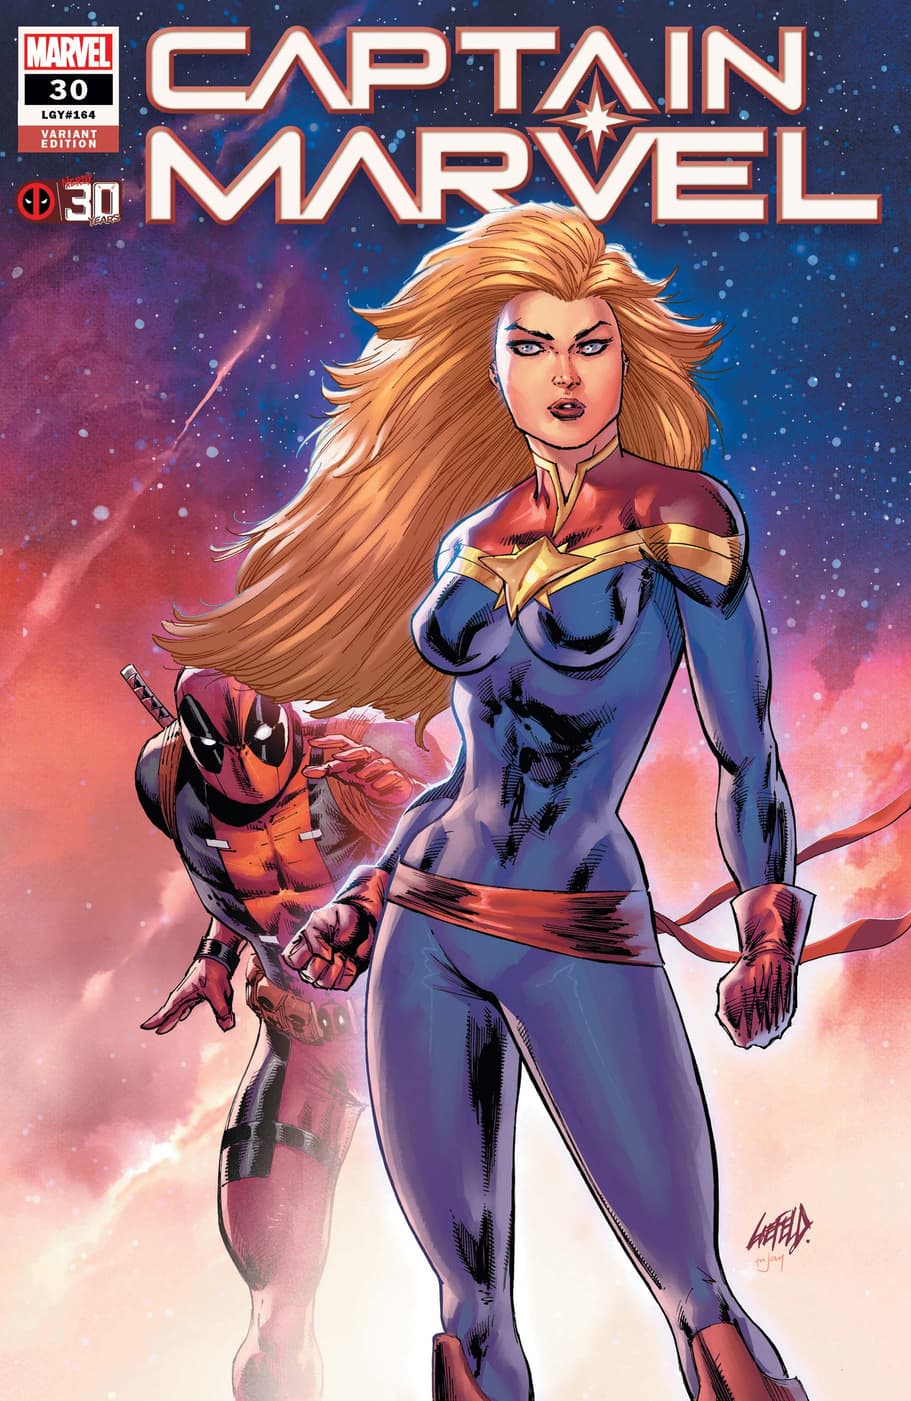 CAPTAIN MARVEL #30 variant cover by Rob Liefeld